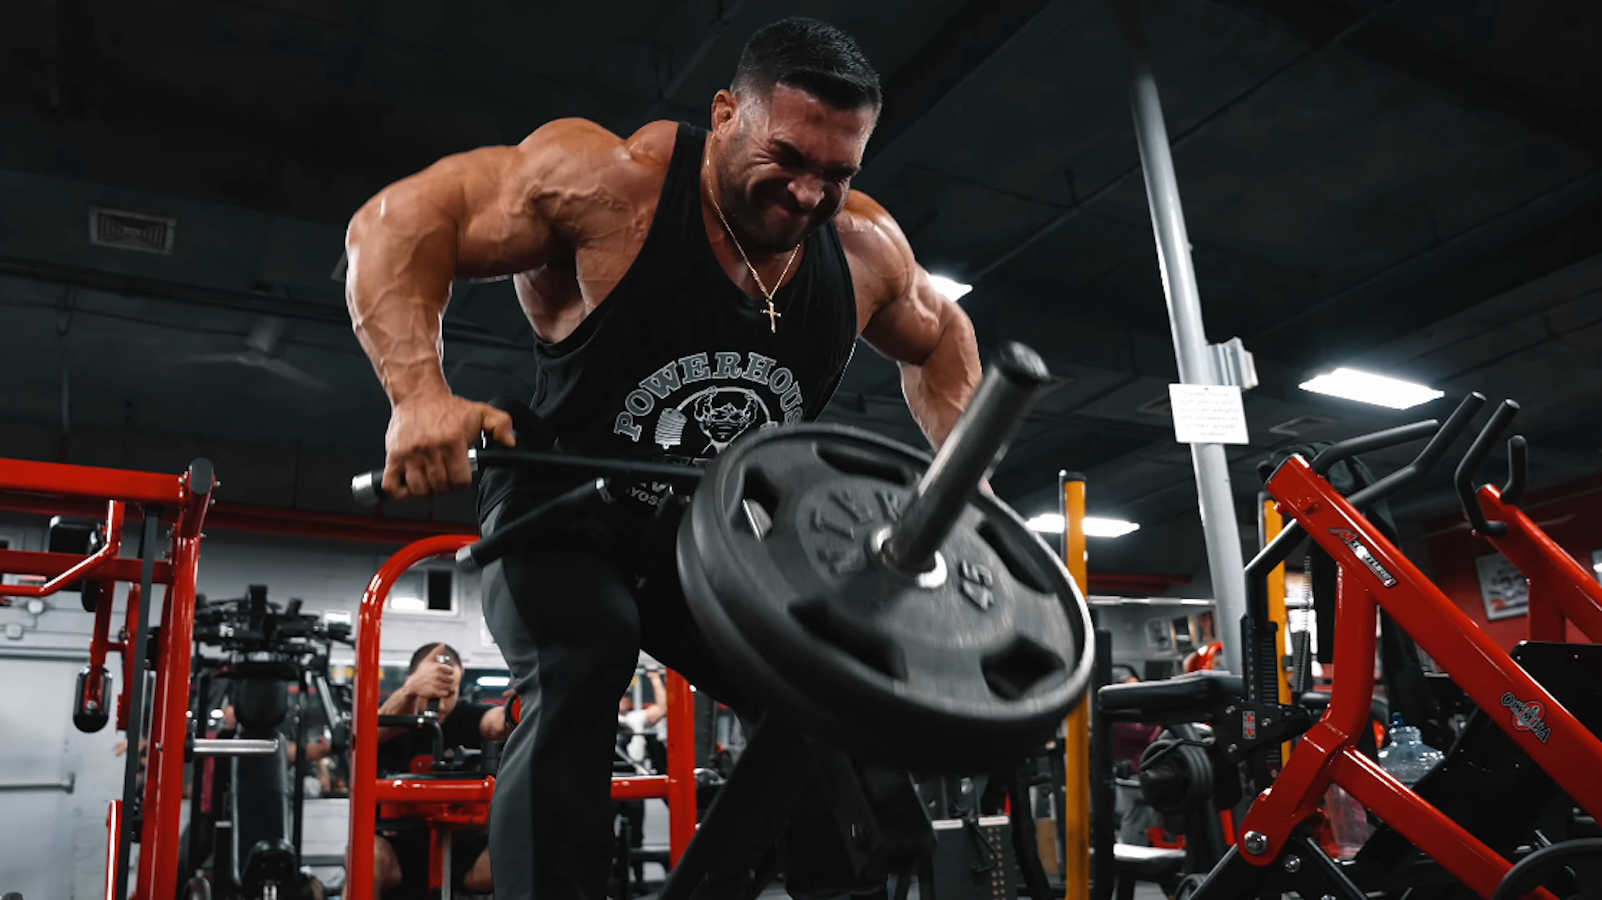 new-mr.-olympia-derek-lunsford-trains-back-at-legendary-bev-francis-powerhouse-gym-–-breaking-muscle